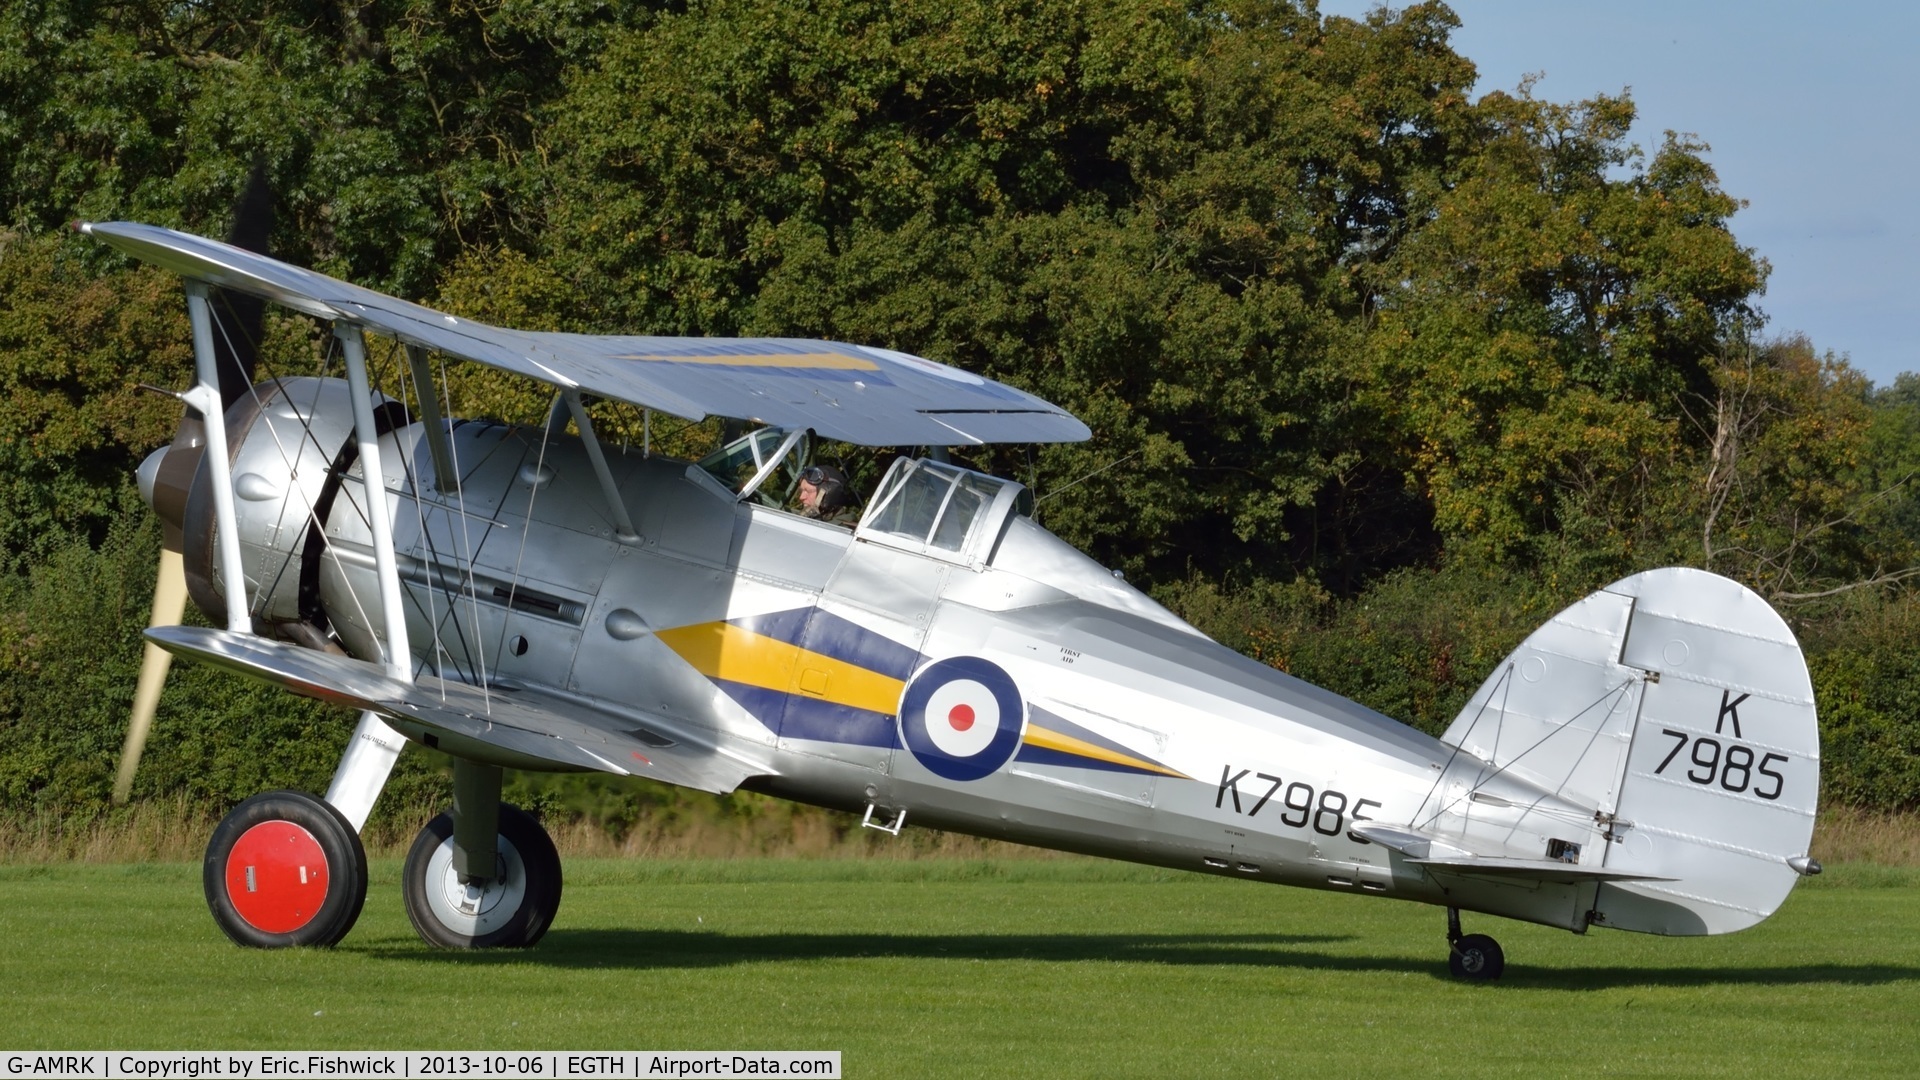 G-AMRK, 1937 Gloster Gladiator Mk1 C/N [L8032], 1. K7985 at The Shuttleworth Collection October Flying Day - (The final Flying Day of their 50th Anniversary Season.)